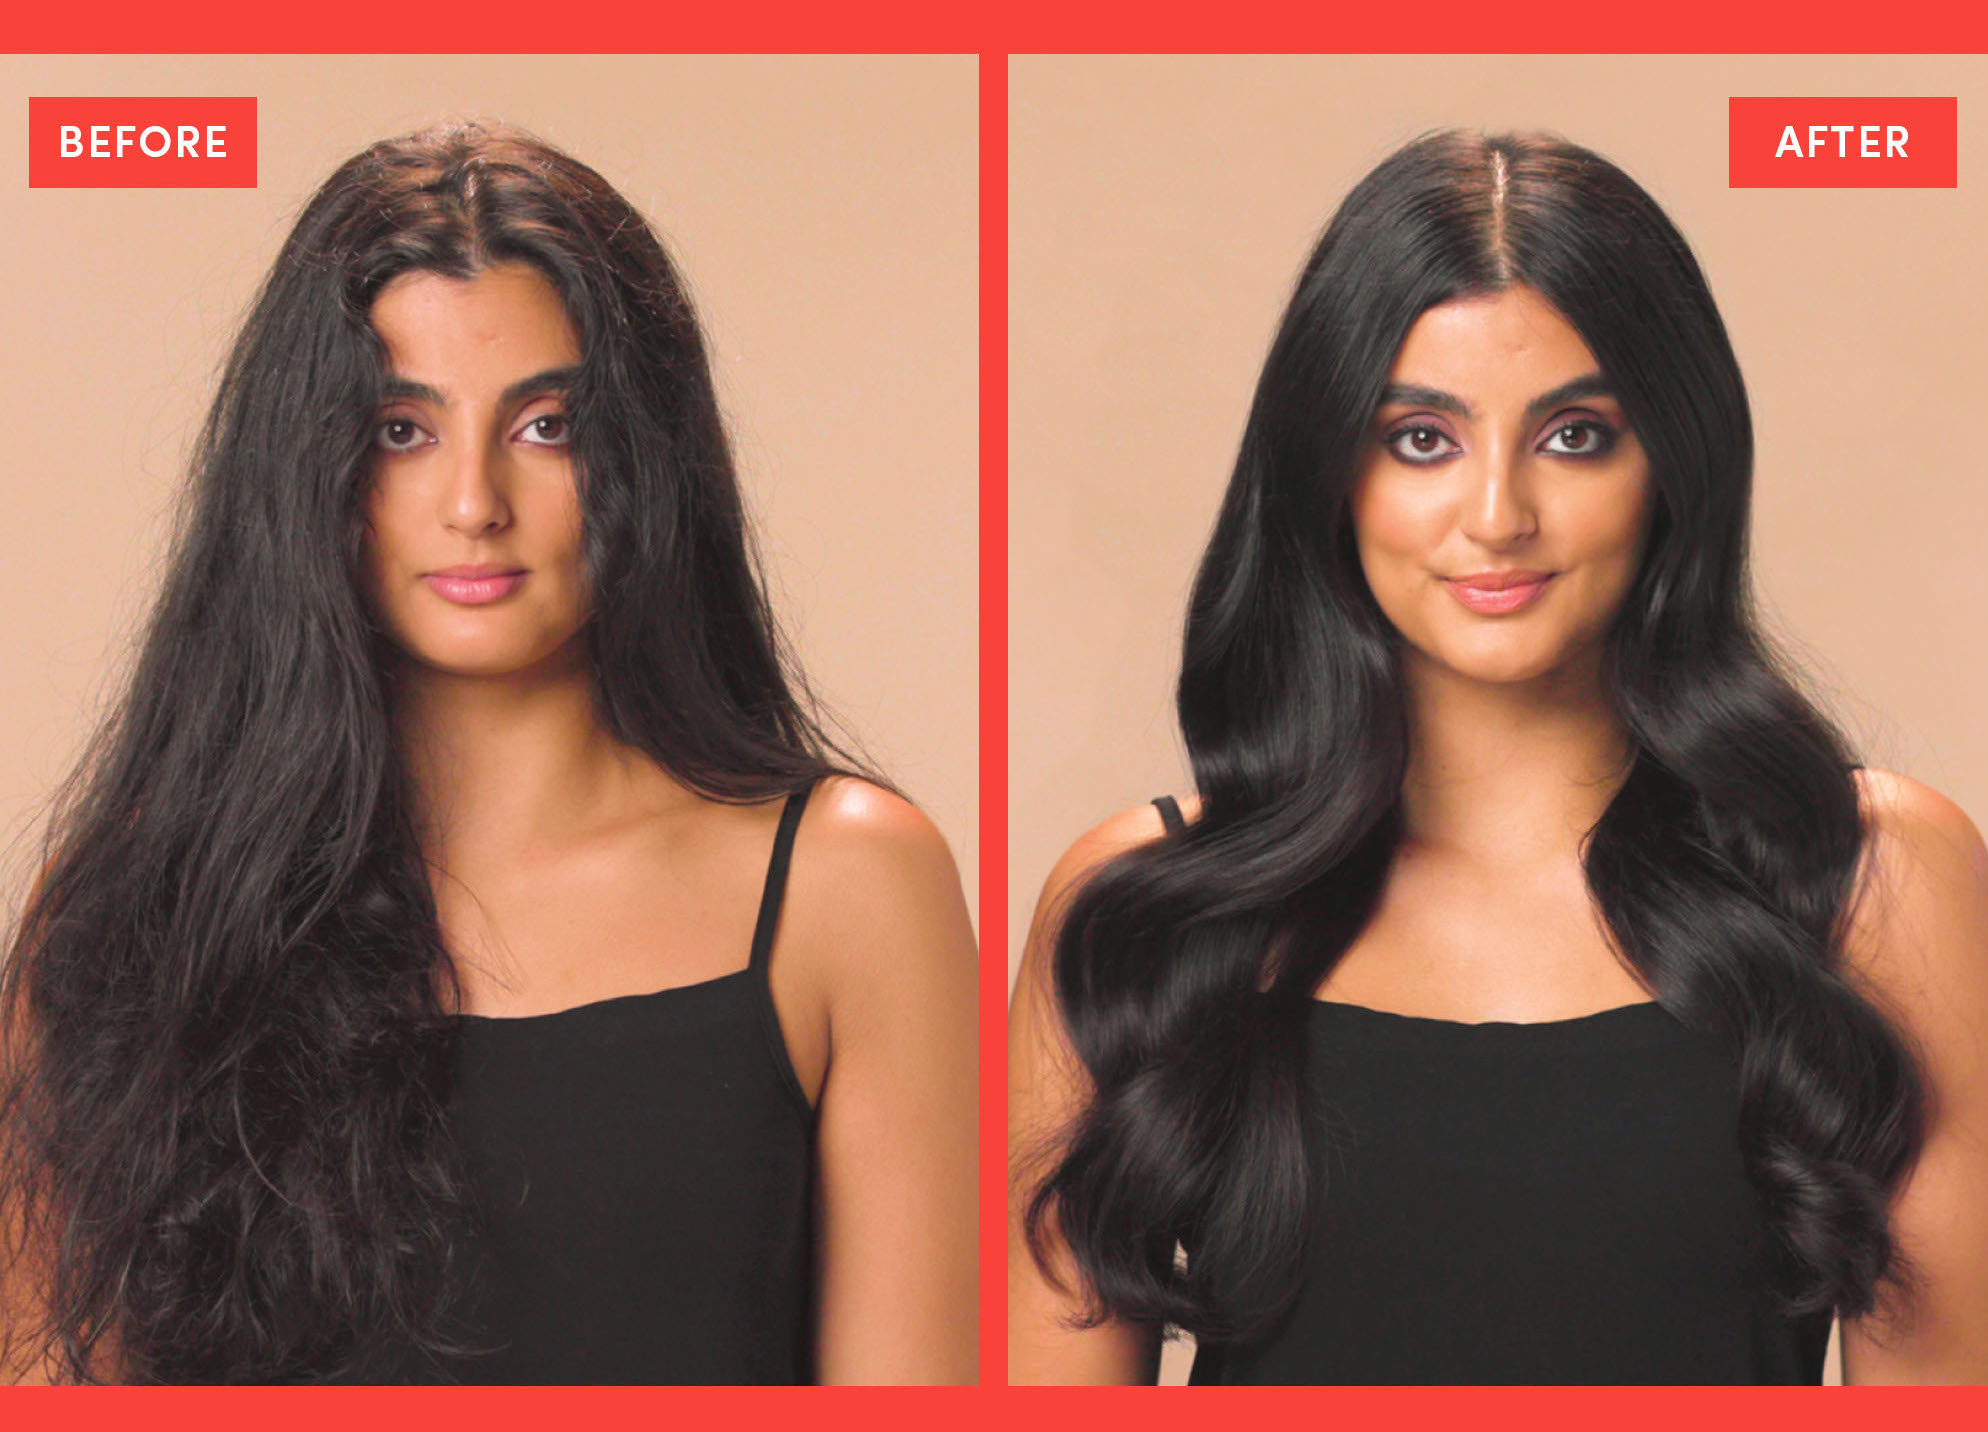 A person showing before and after images of their hair